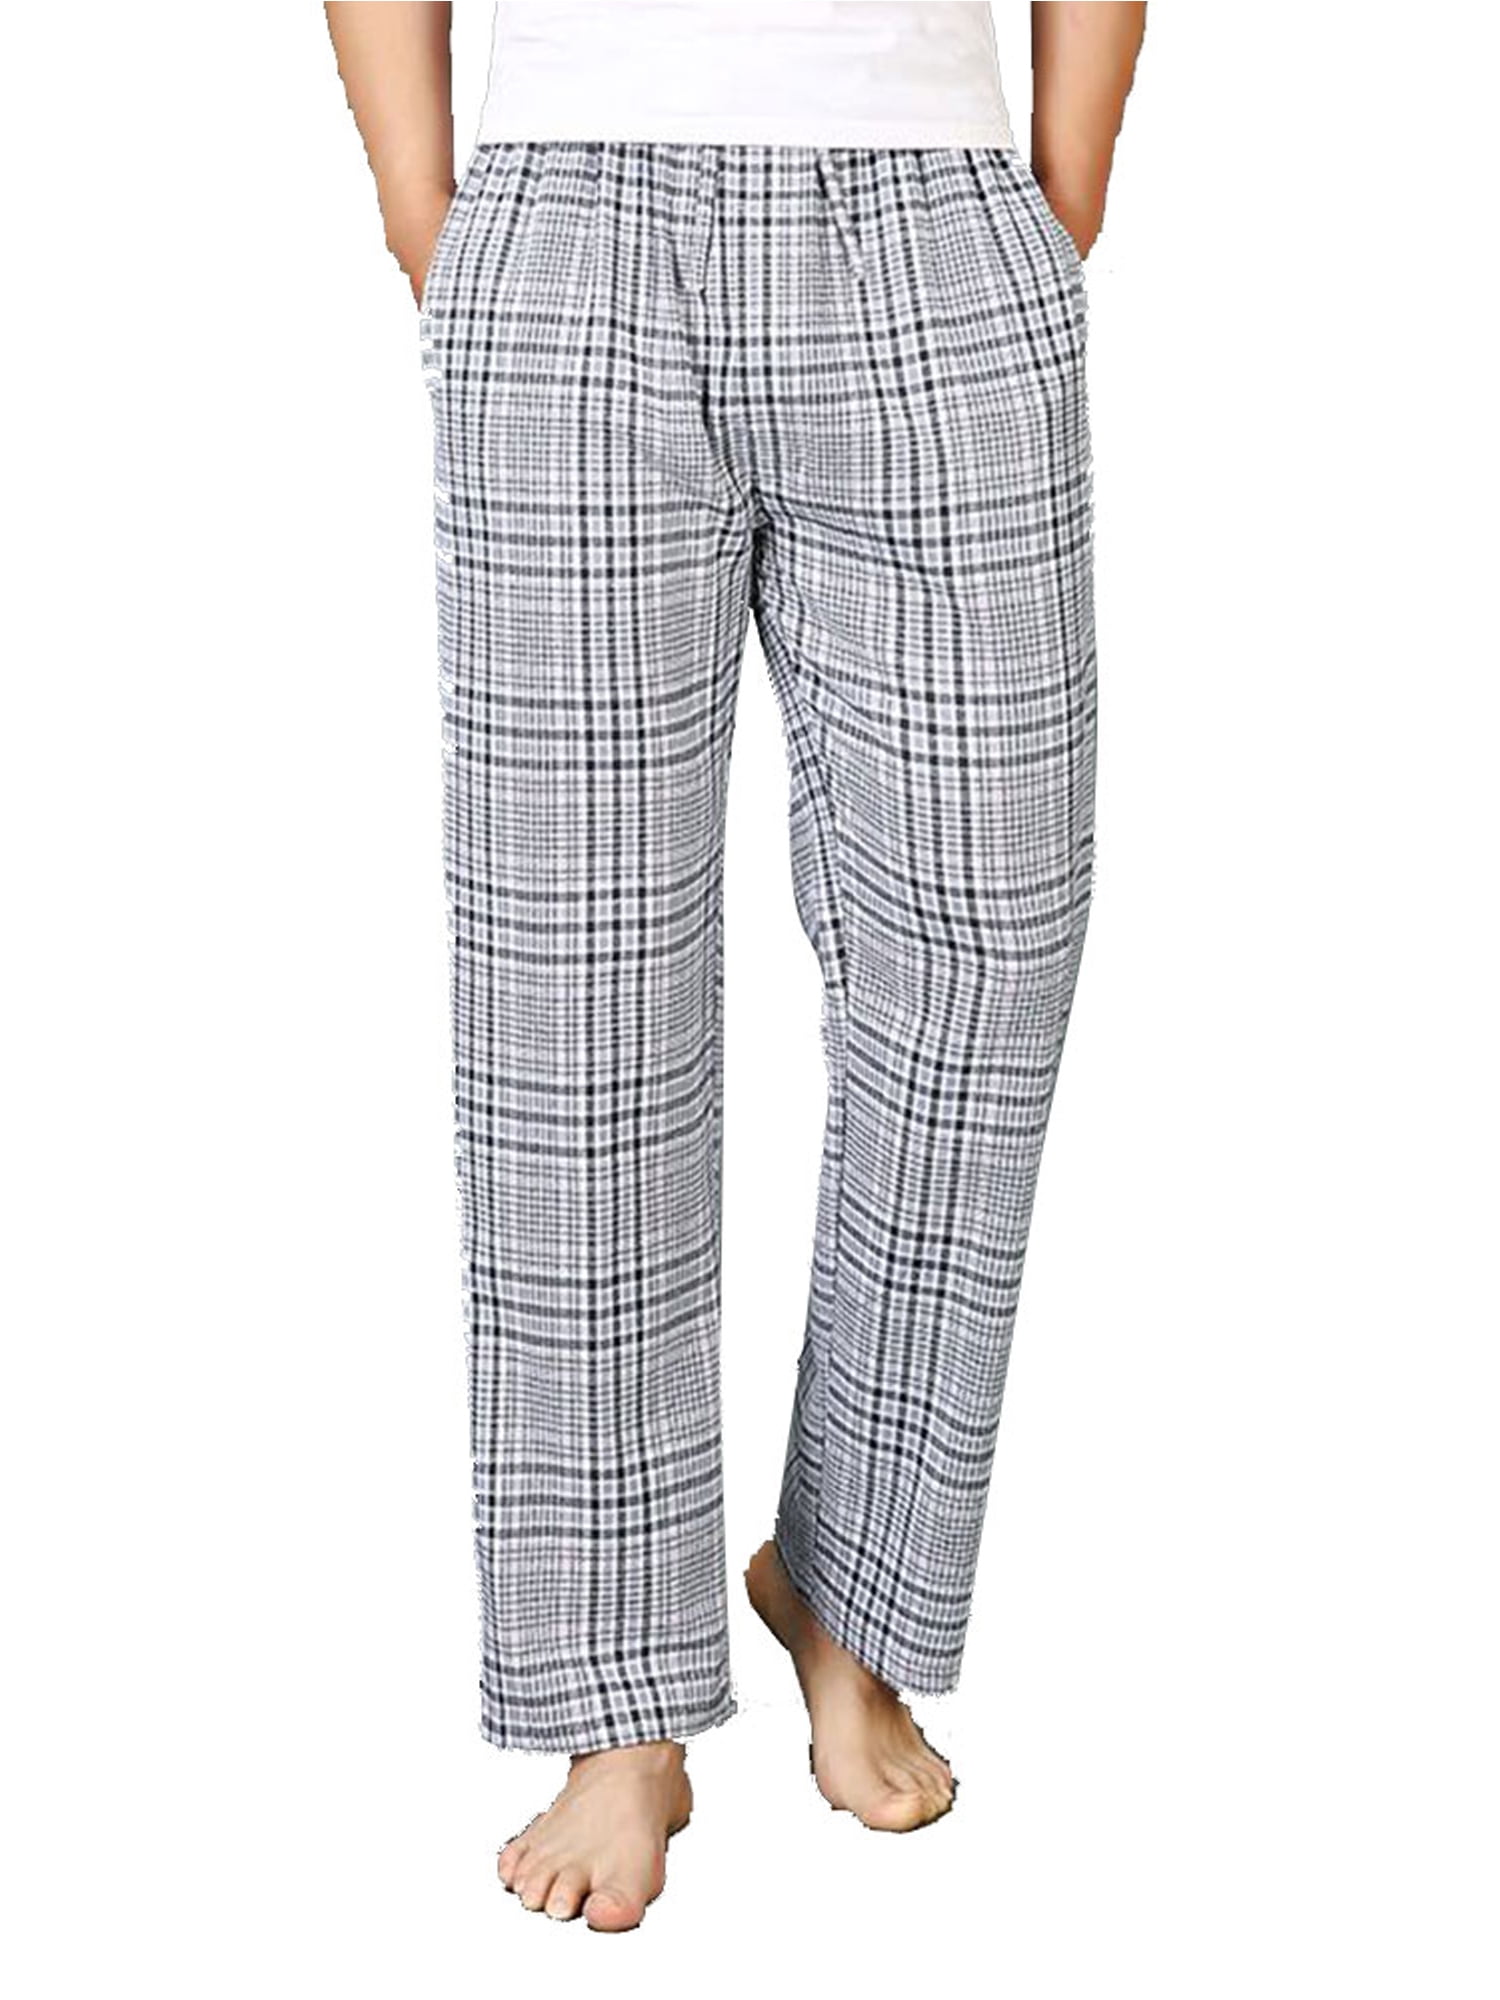 BIONIO Men's Plaid Pajama Pants with Drawstring，Casual Loose Fit Comfy Elastic Waist Daily Home Pants Trousers with Pockets 